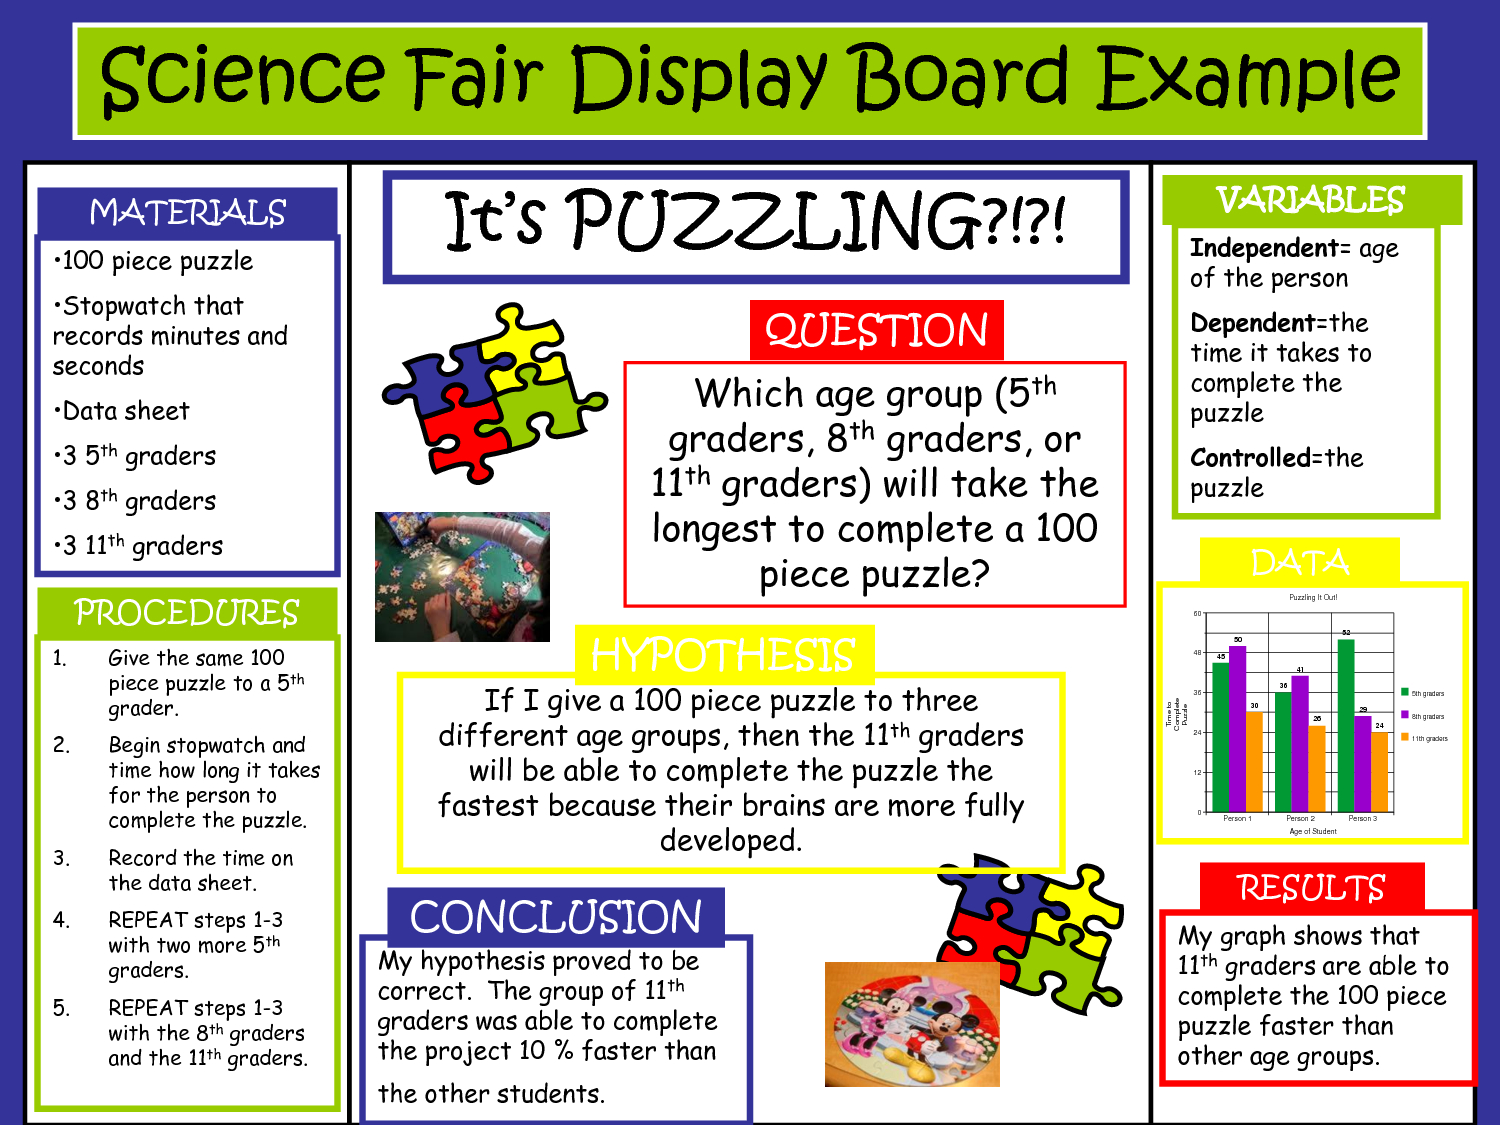 Science Fair Project Boards Examples | Science Fair Display Board - Free Printable Science Fair Project Board Labels